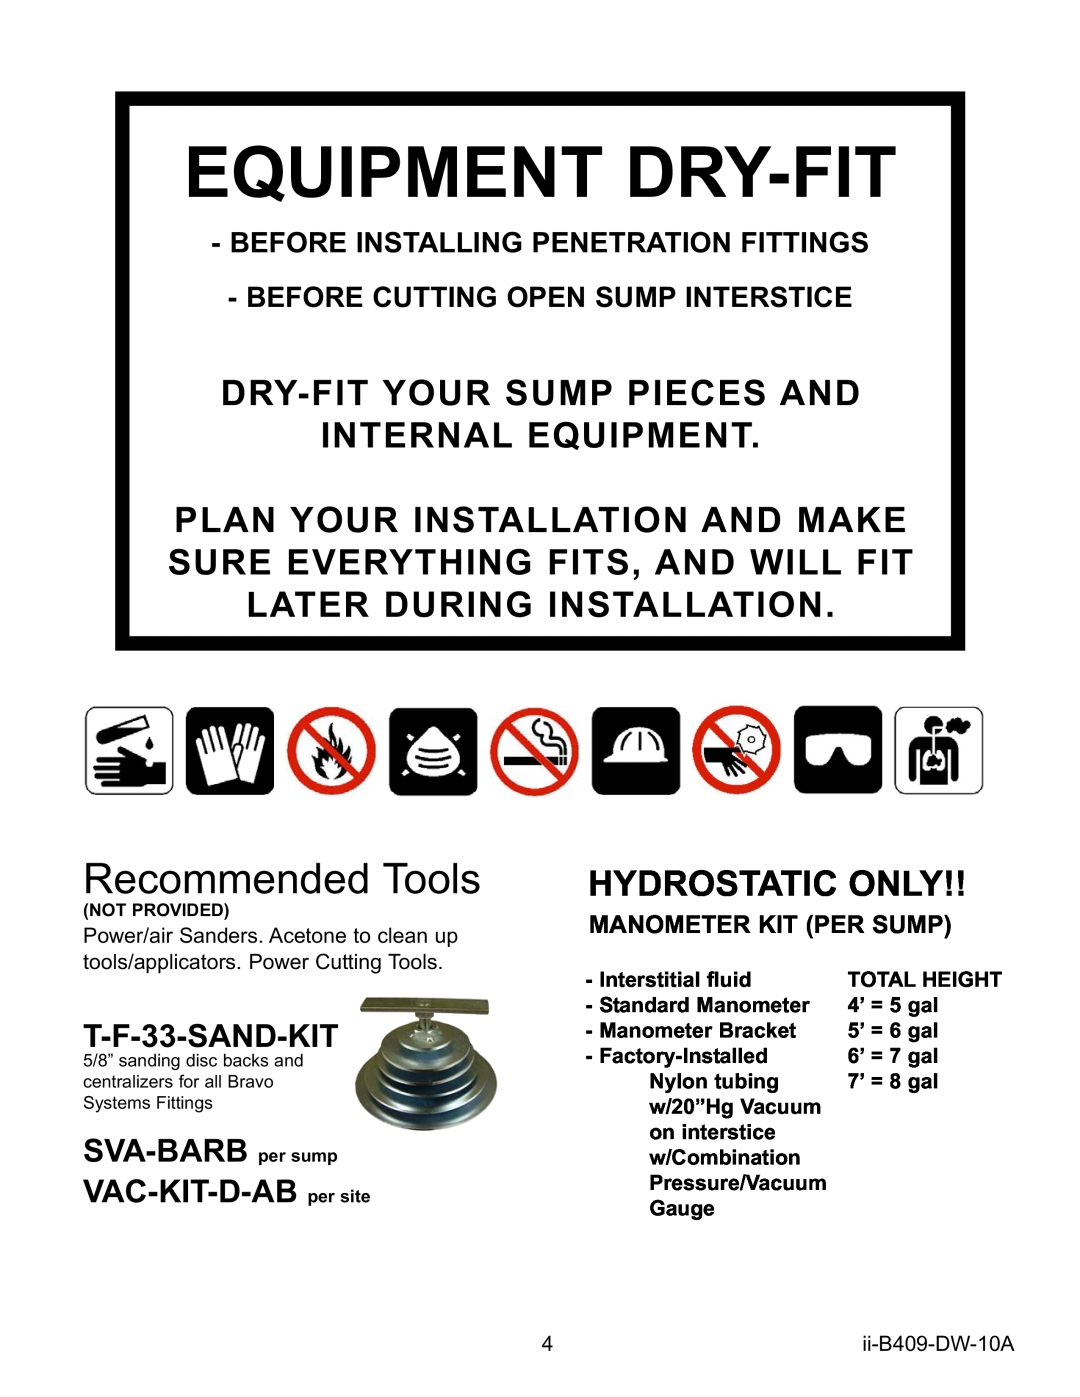 Bravo View B409 Equipment Dry-Fit, Recommended Tools, Dry-Fit Your Sump Pieces And Internal Equipment, Hydrostatic Only 